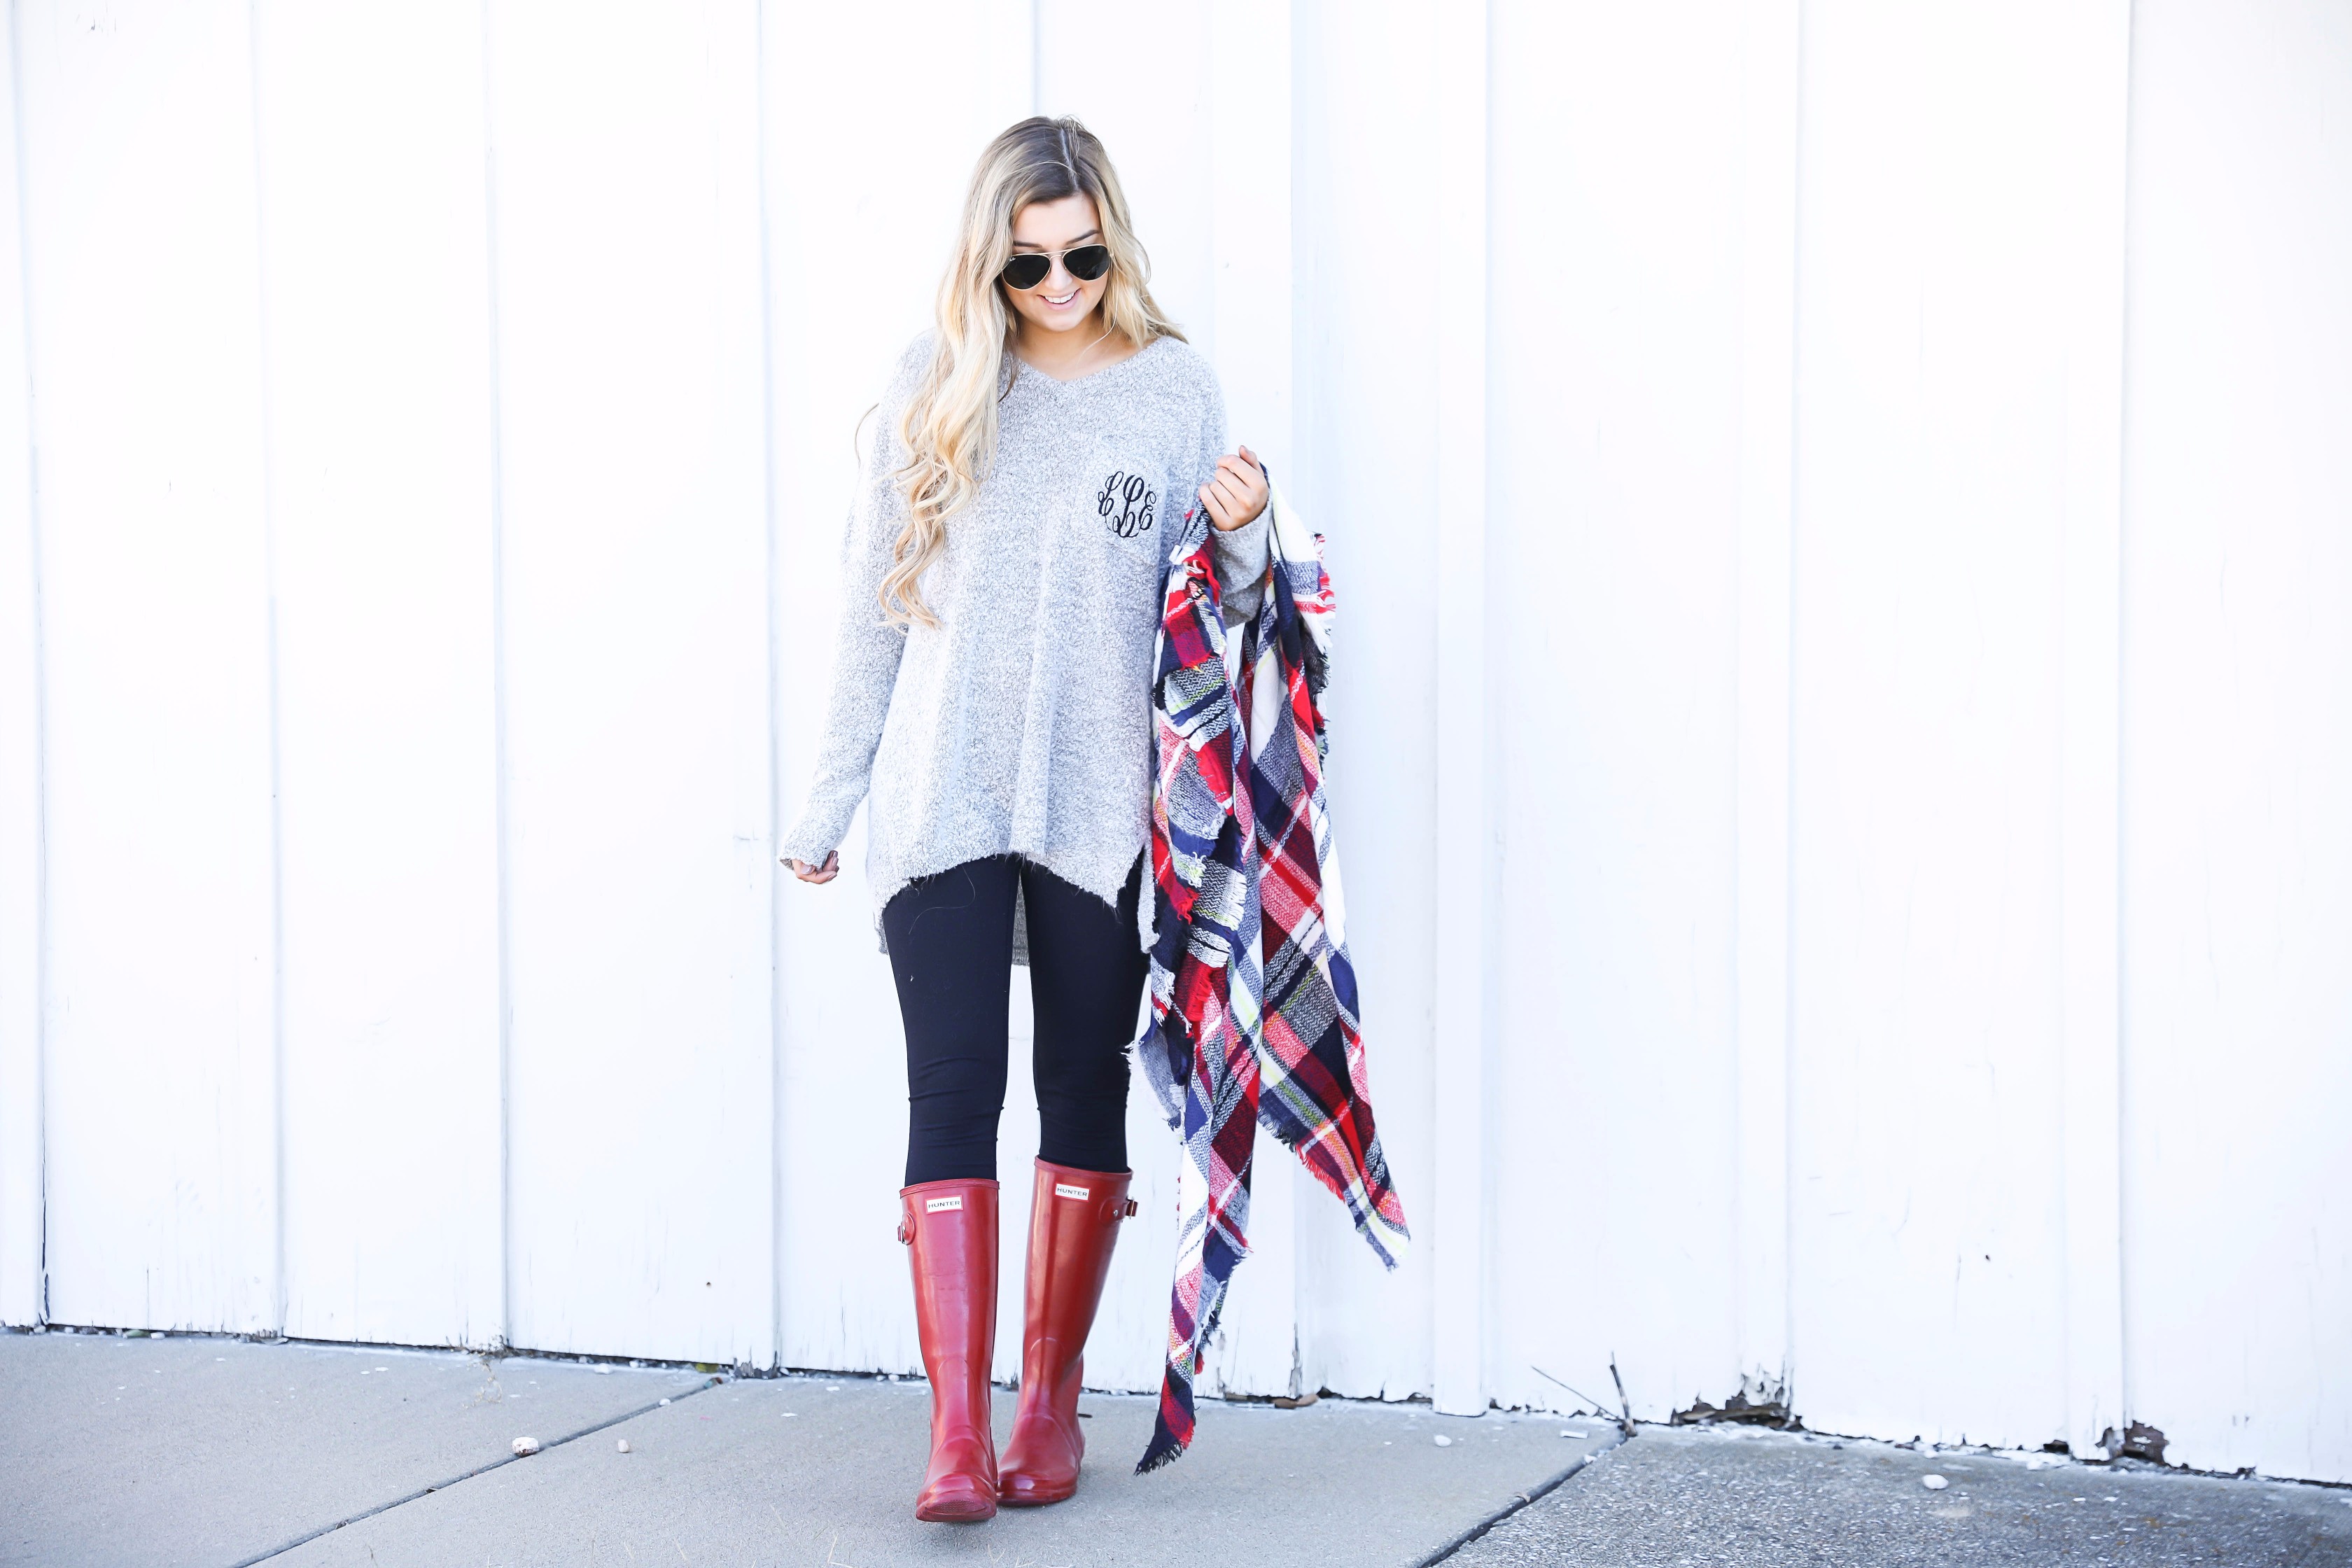 How to tie blanket scarves! This cute Marley Lilly Monogrammed Boyfriend Sweater and ilymix scarf make for the cutest fall outfit! Find all the details on fashion blog daily dose of charm by Lauren Lindmark